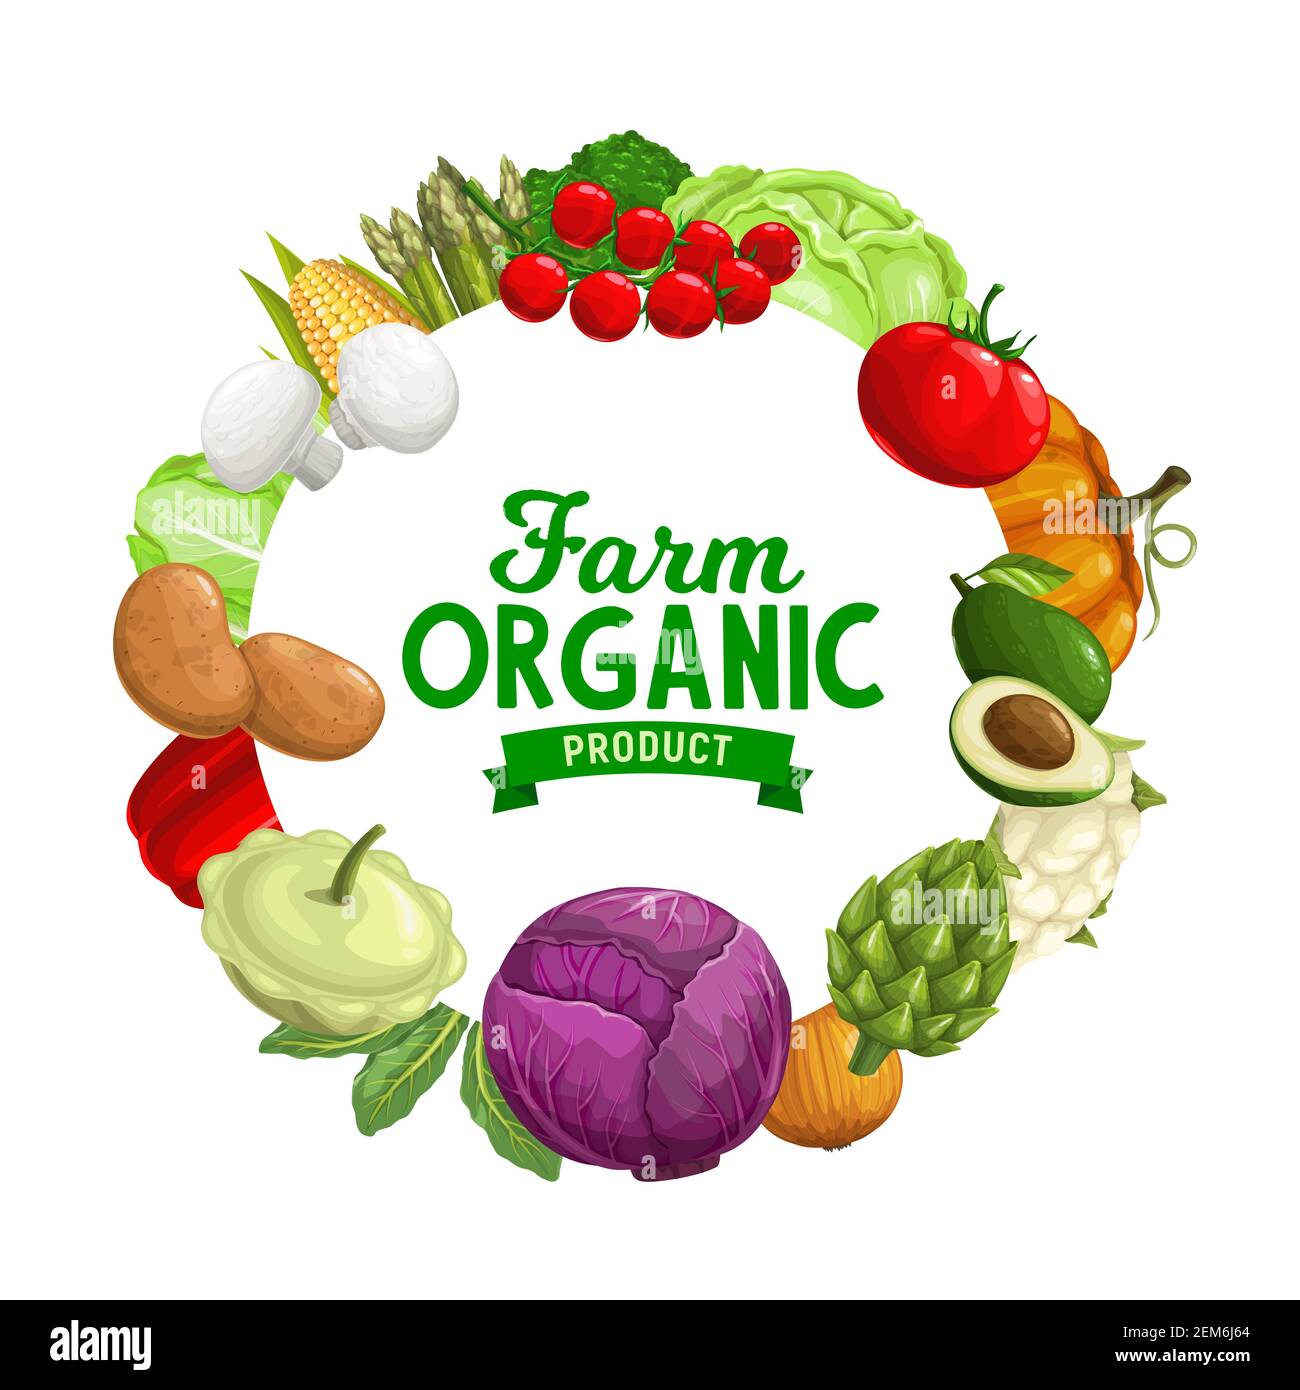 Farm vegetables vector icon with tomatoes, pepper and onion, broccoli, potatoes, red and green cabbages, asparagus, pumpkin and mushrooms, corn, cauli Stock Vector